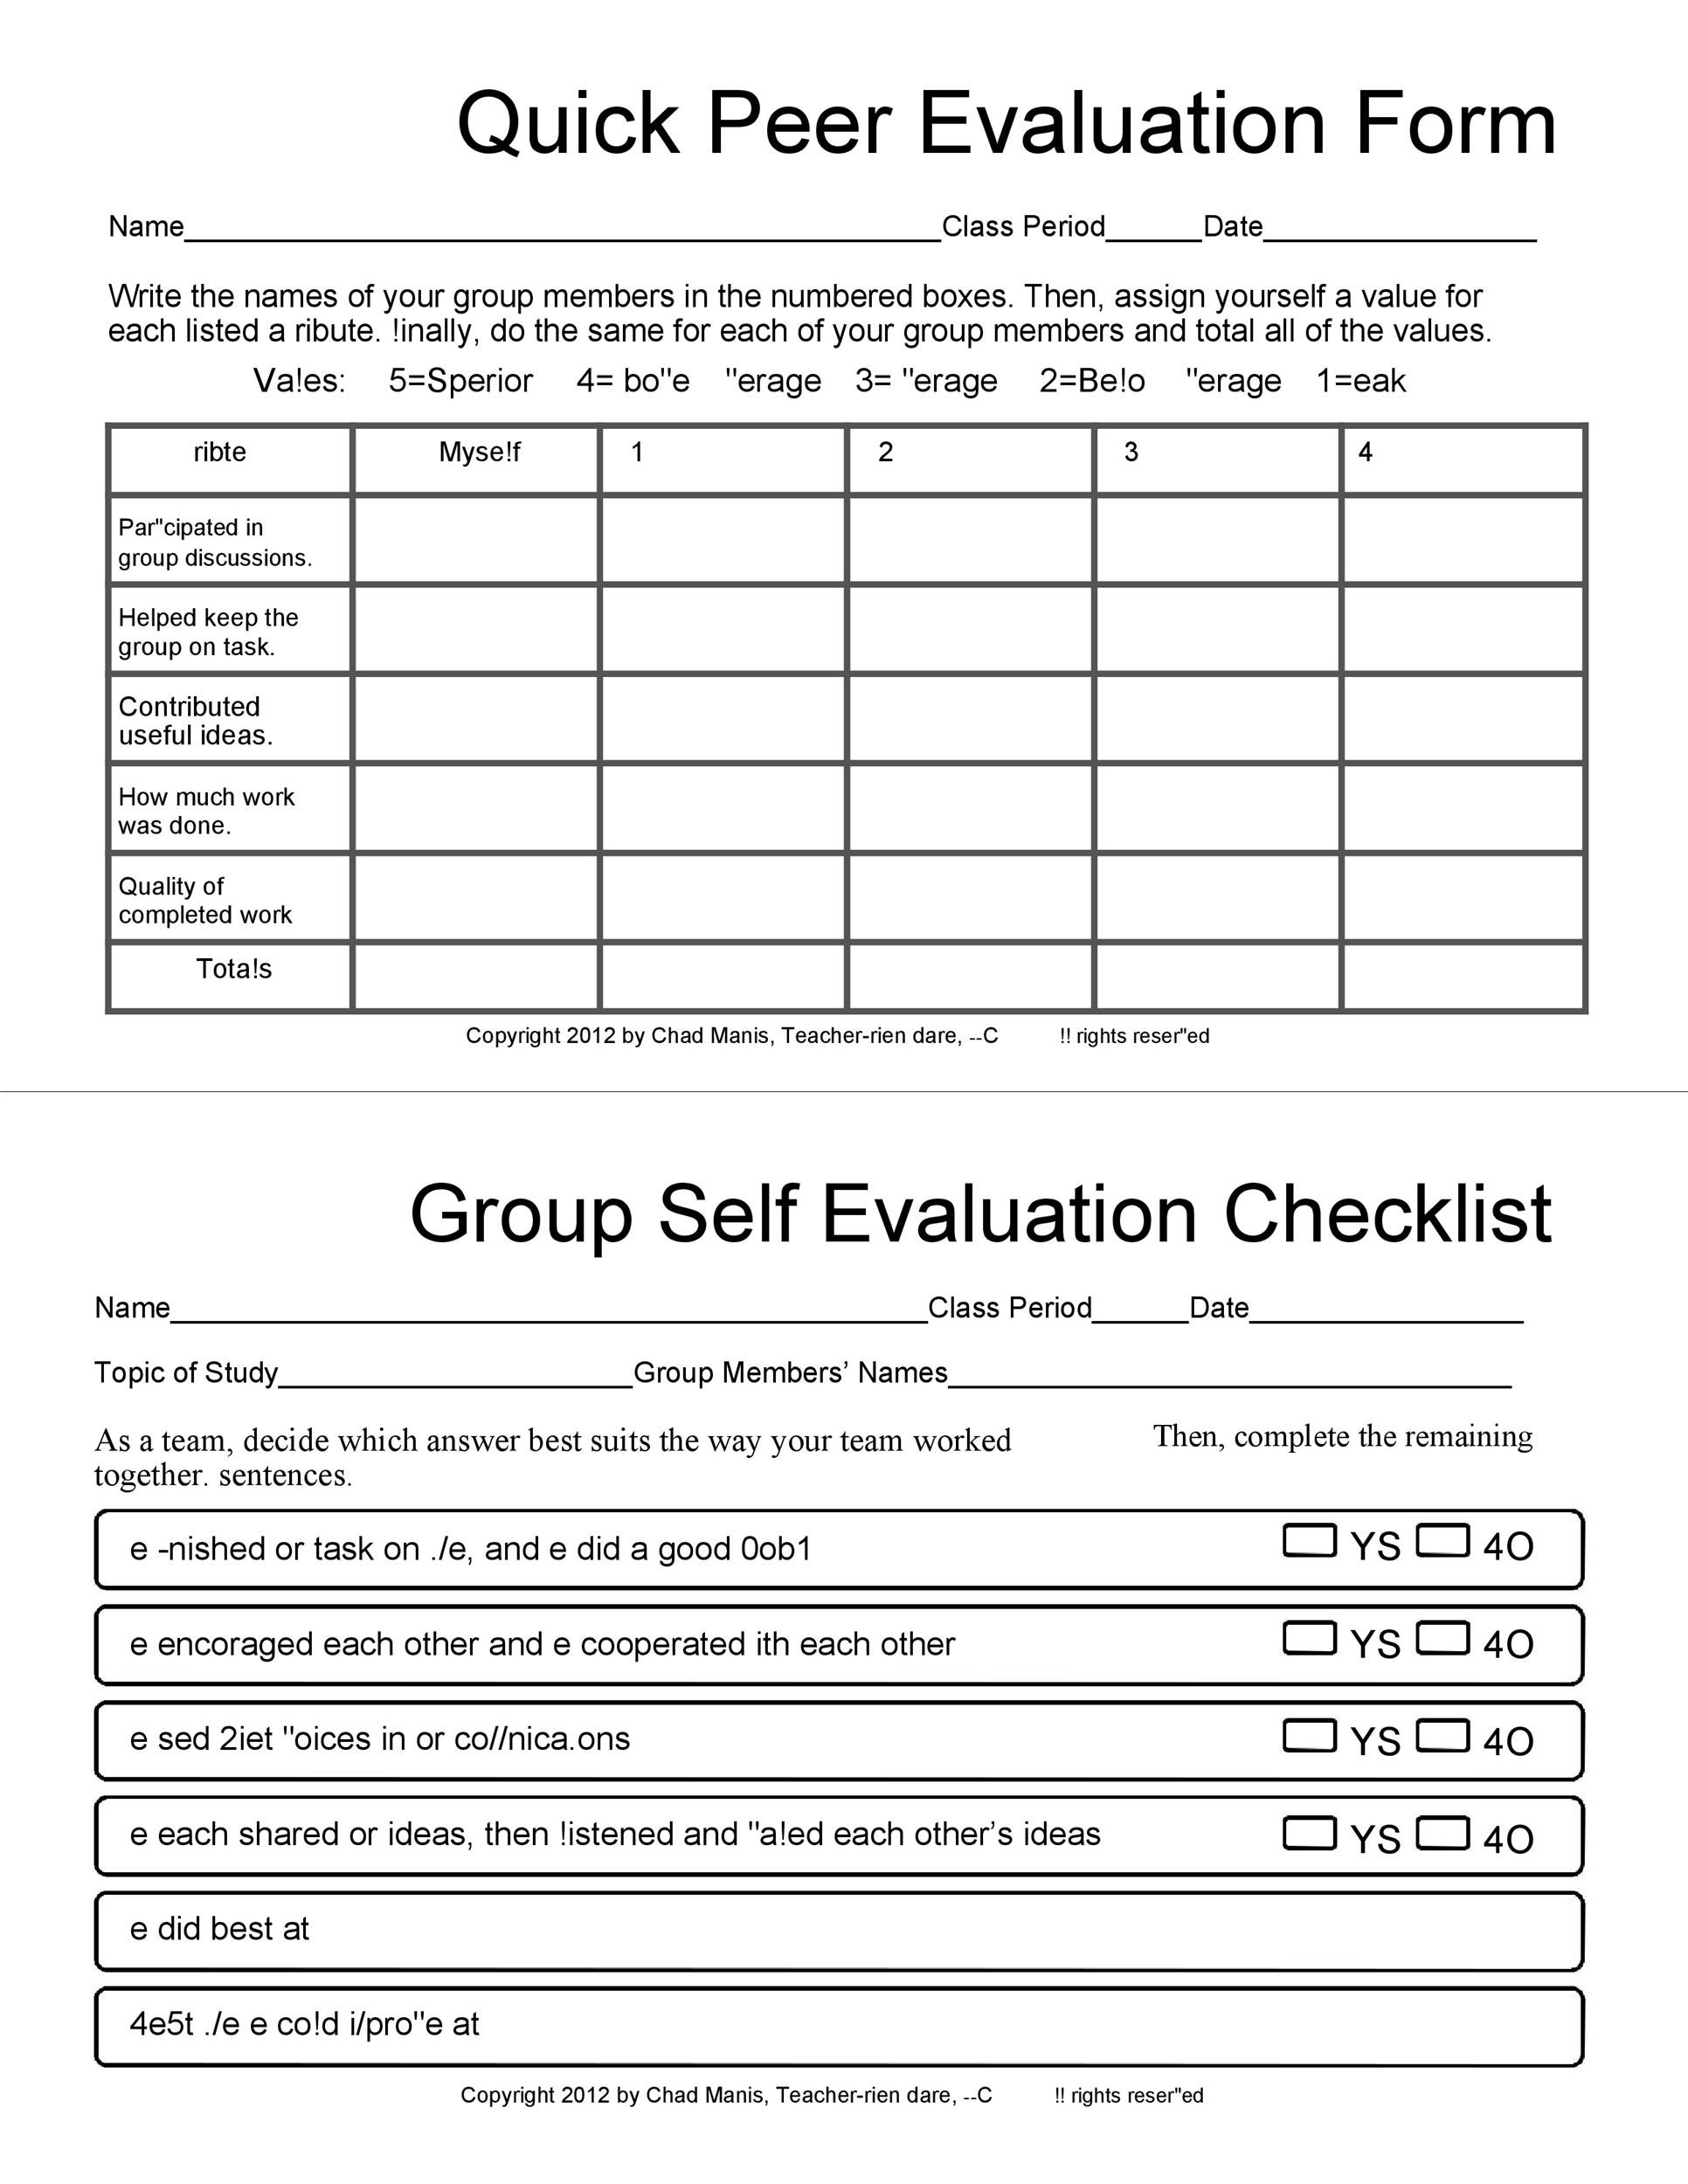 50 Self Evaluation Examples Forms Questions TemplateLab